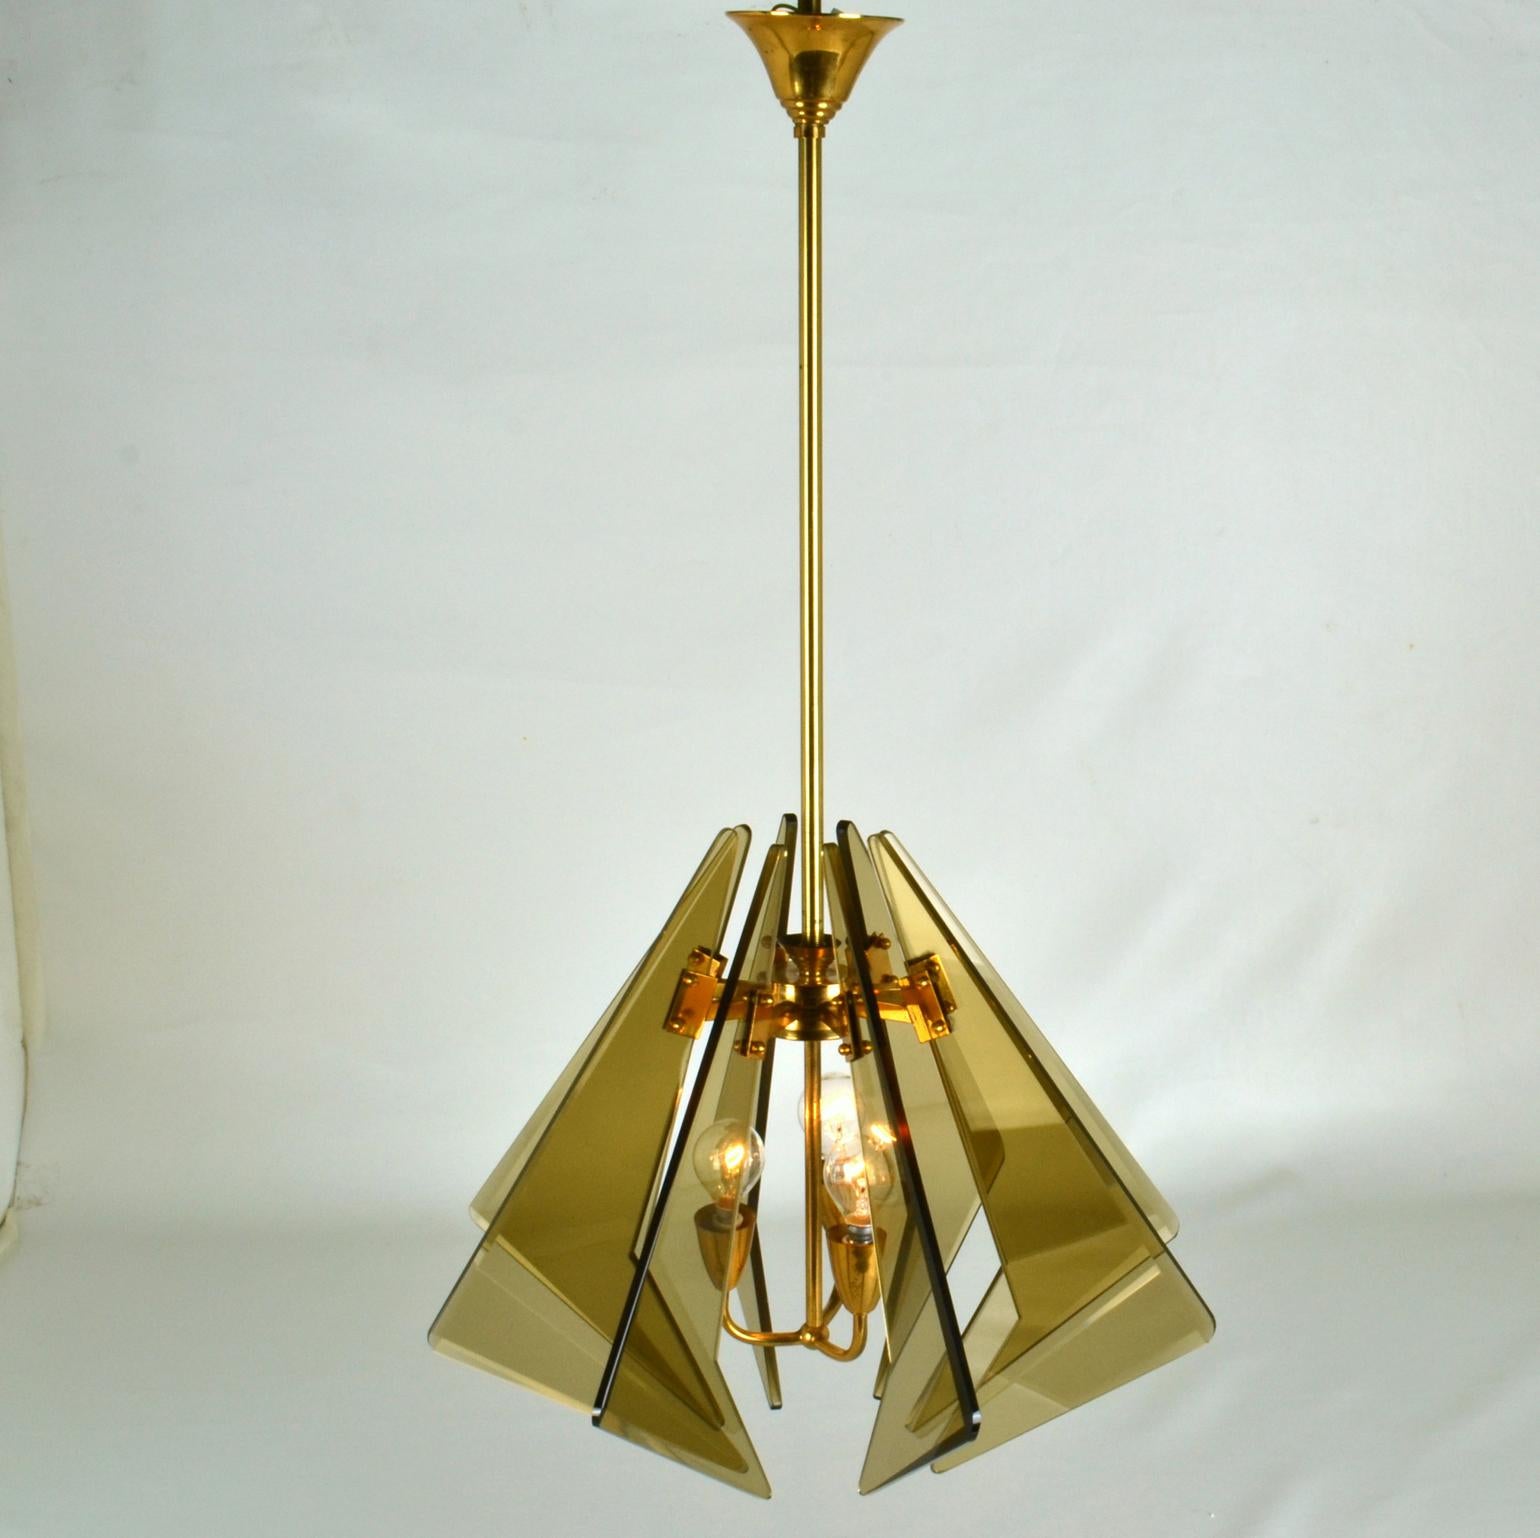 Chandelier inTinted Glass and Gilded Brass by Gino Paroldo, Fontana Arte In Excellent Condition For Sale In London, GB